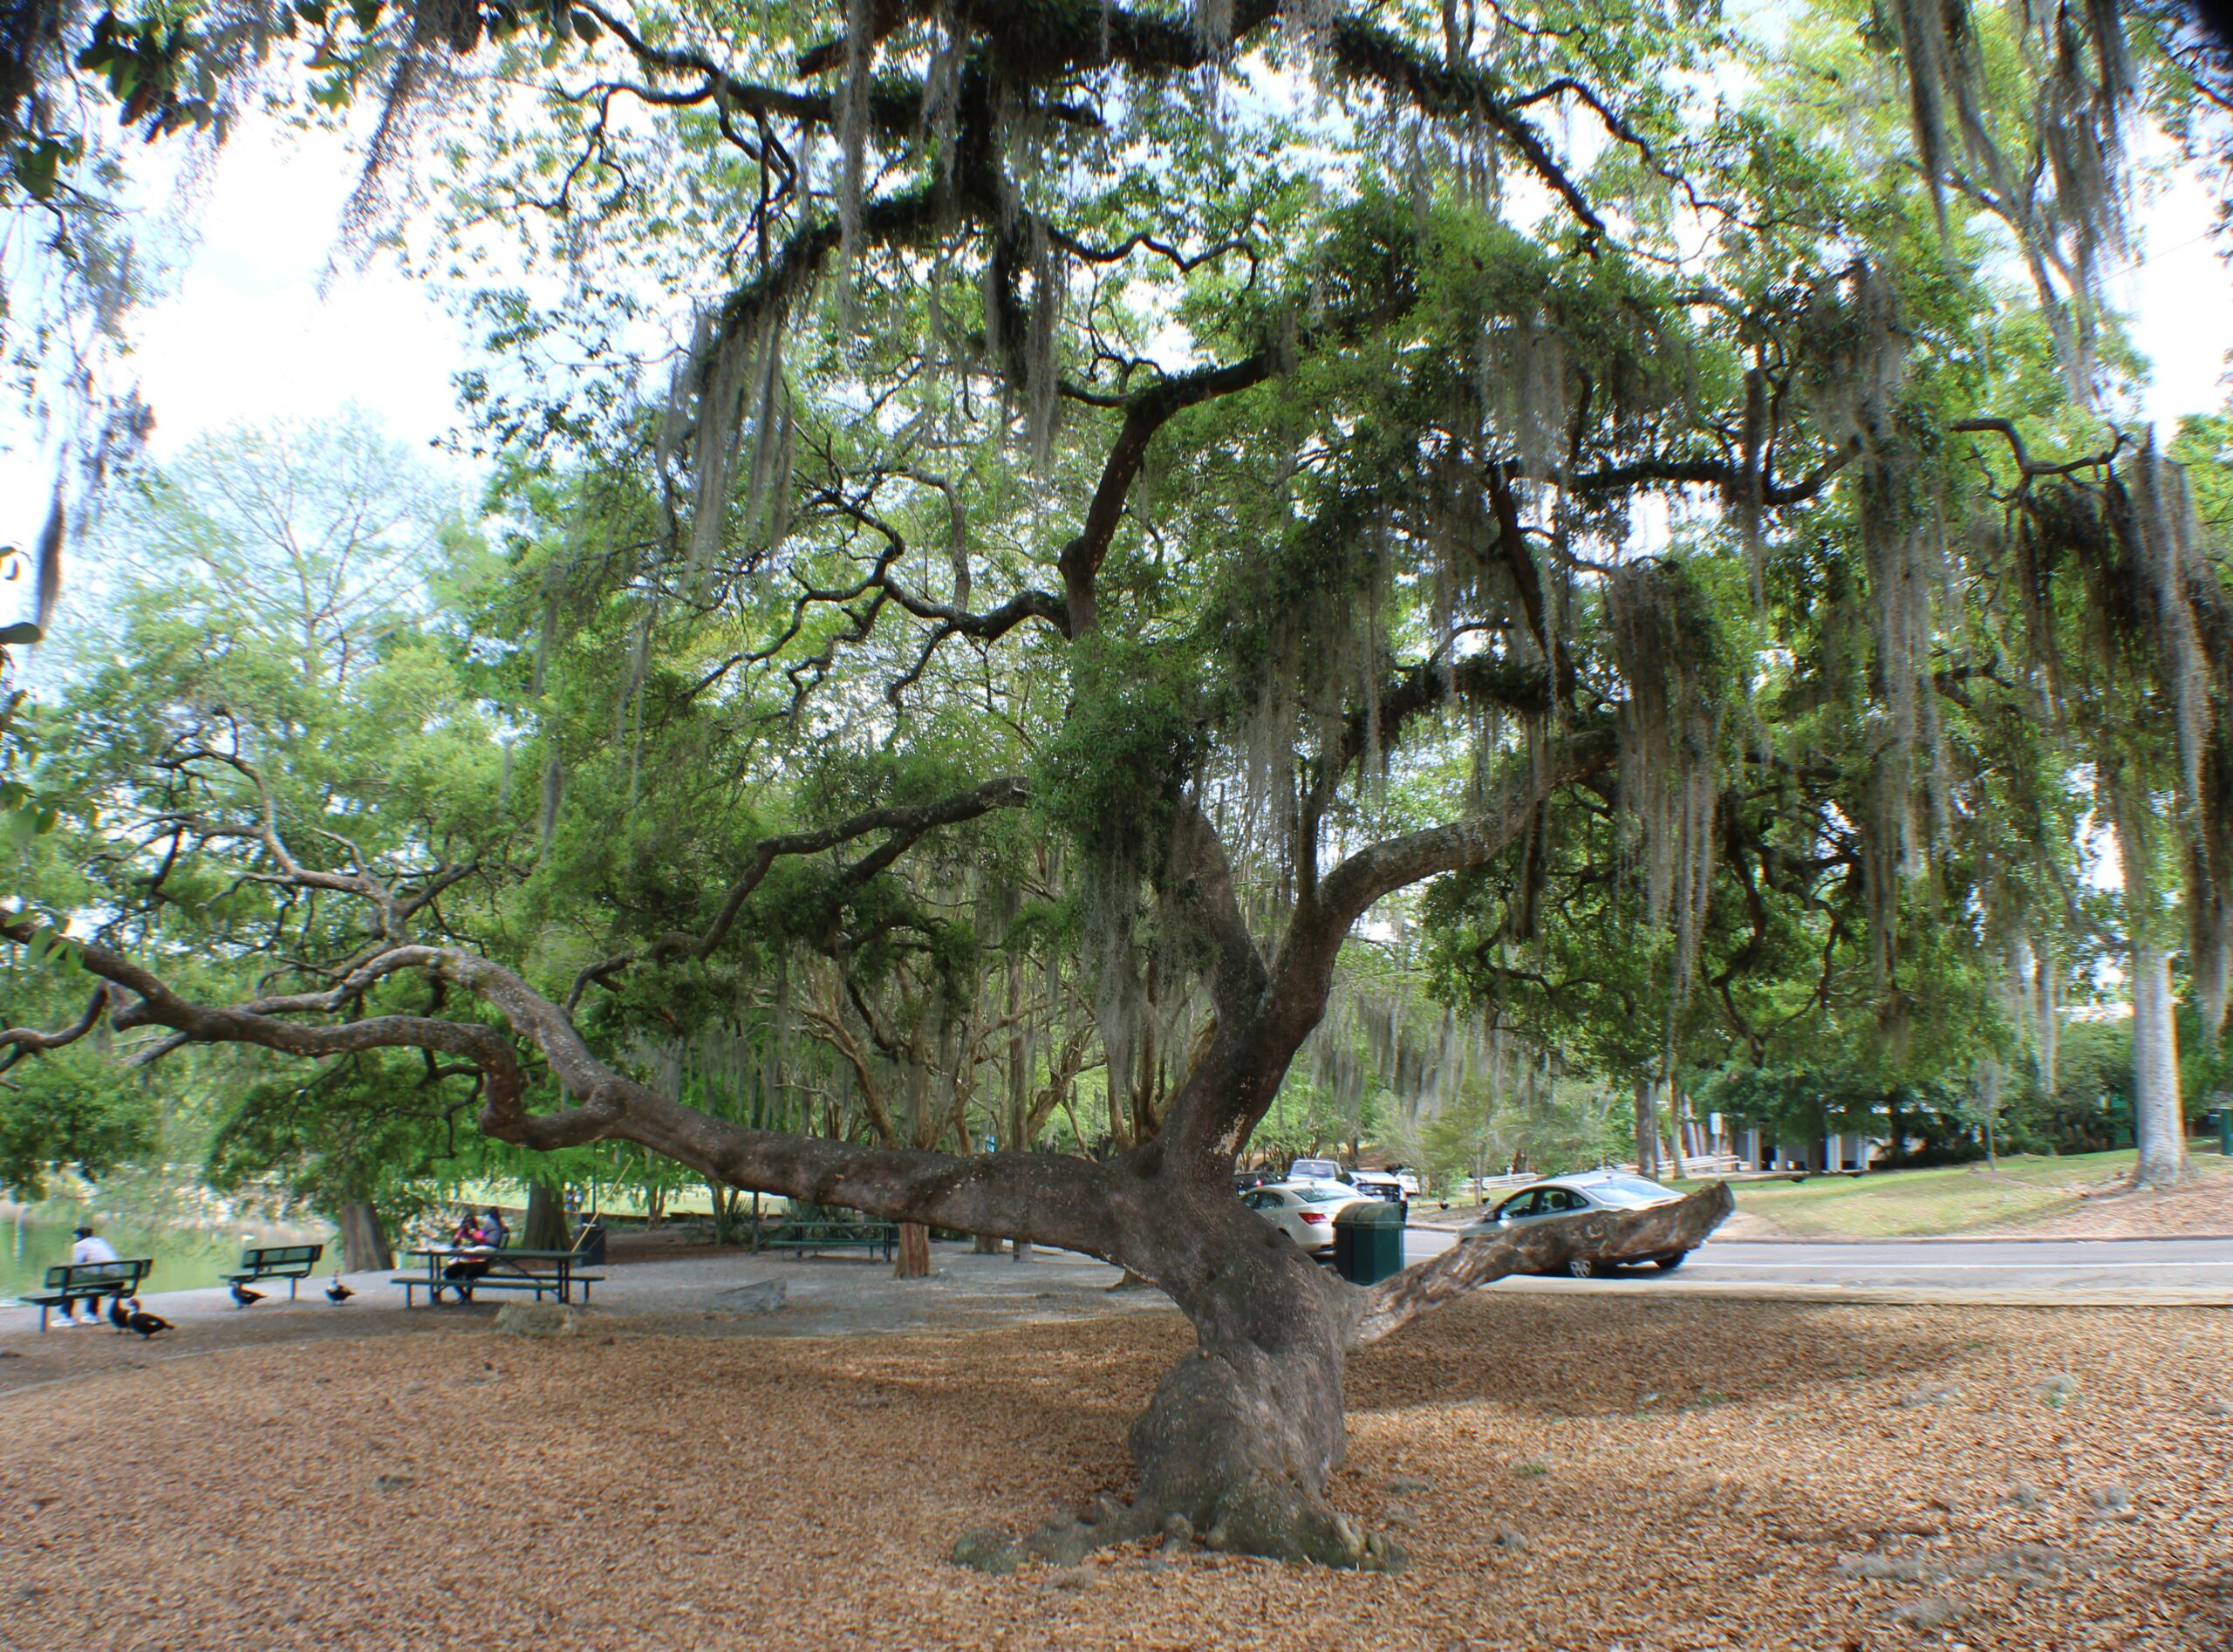 Photo is decorative and taken by a Tallahassee real estate agent. Photo shows the oak tree at Lake Ella that is near the entrance. Kids can climb the branches.